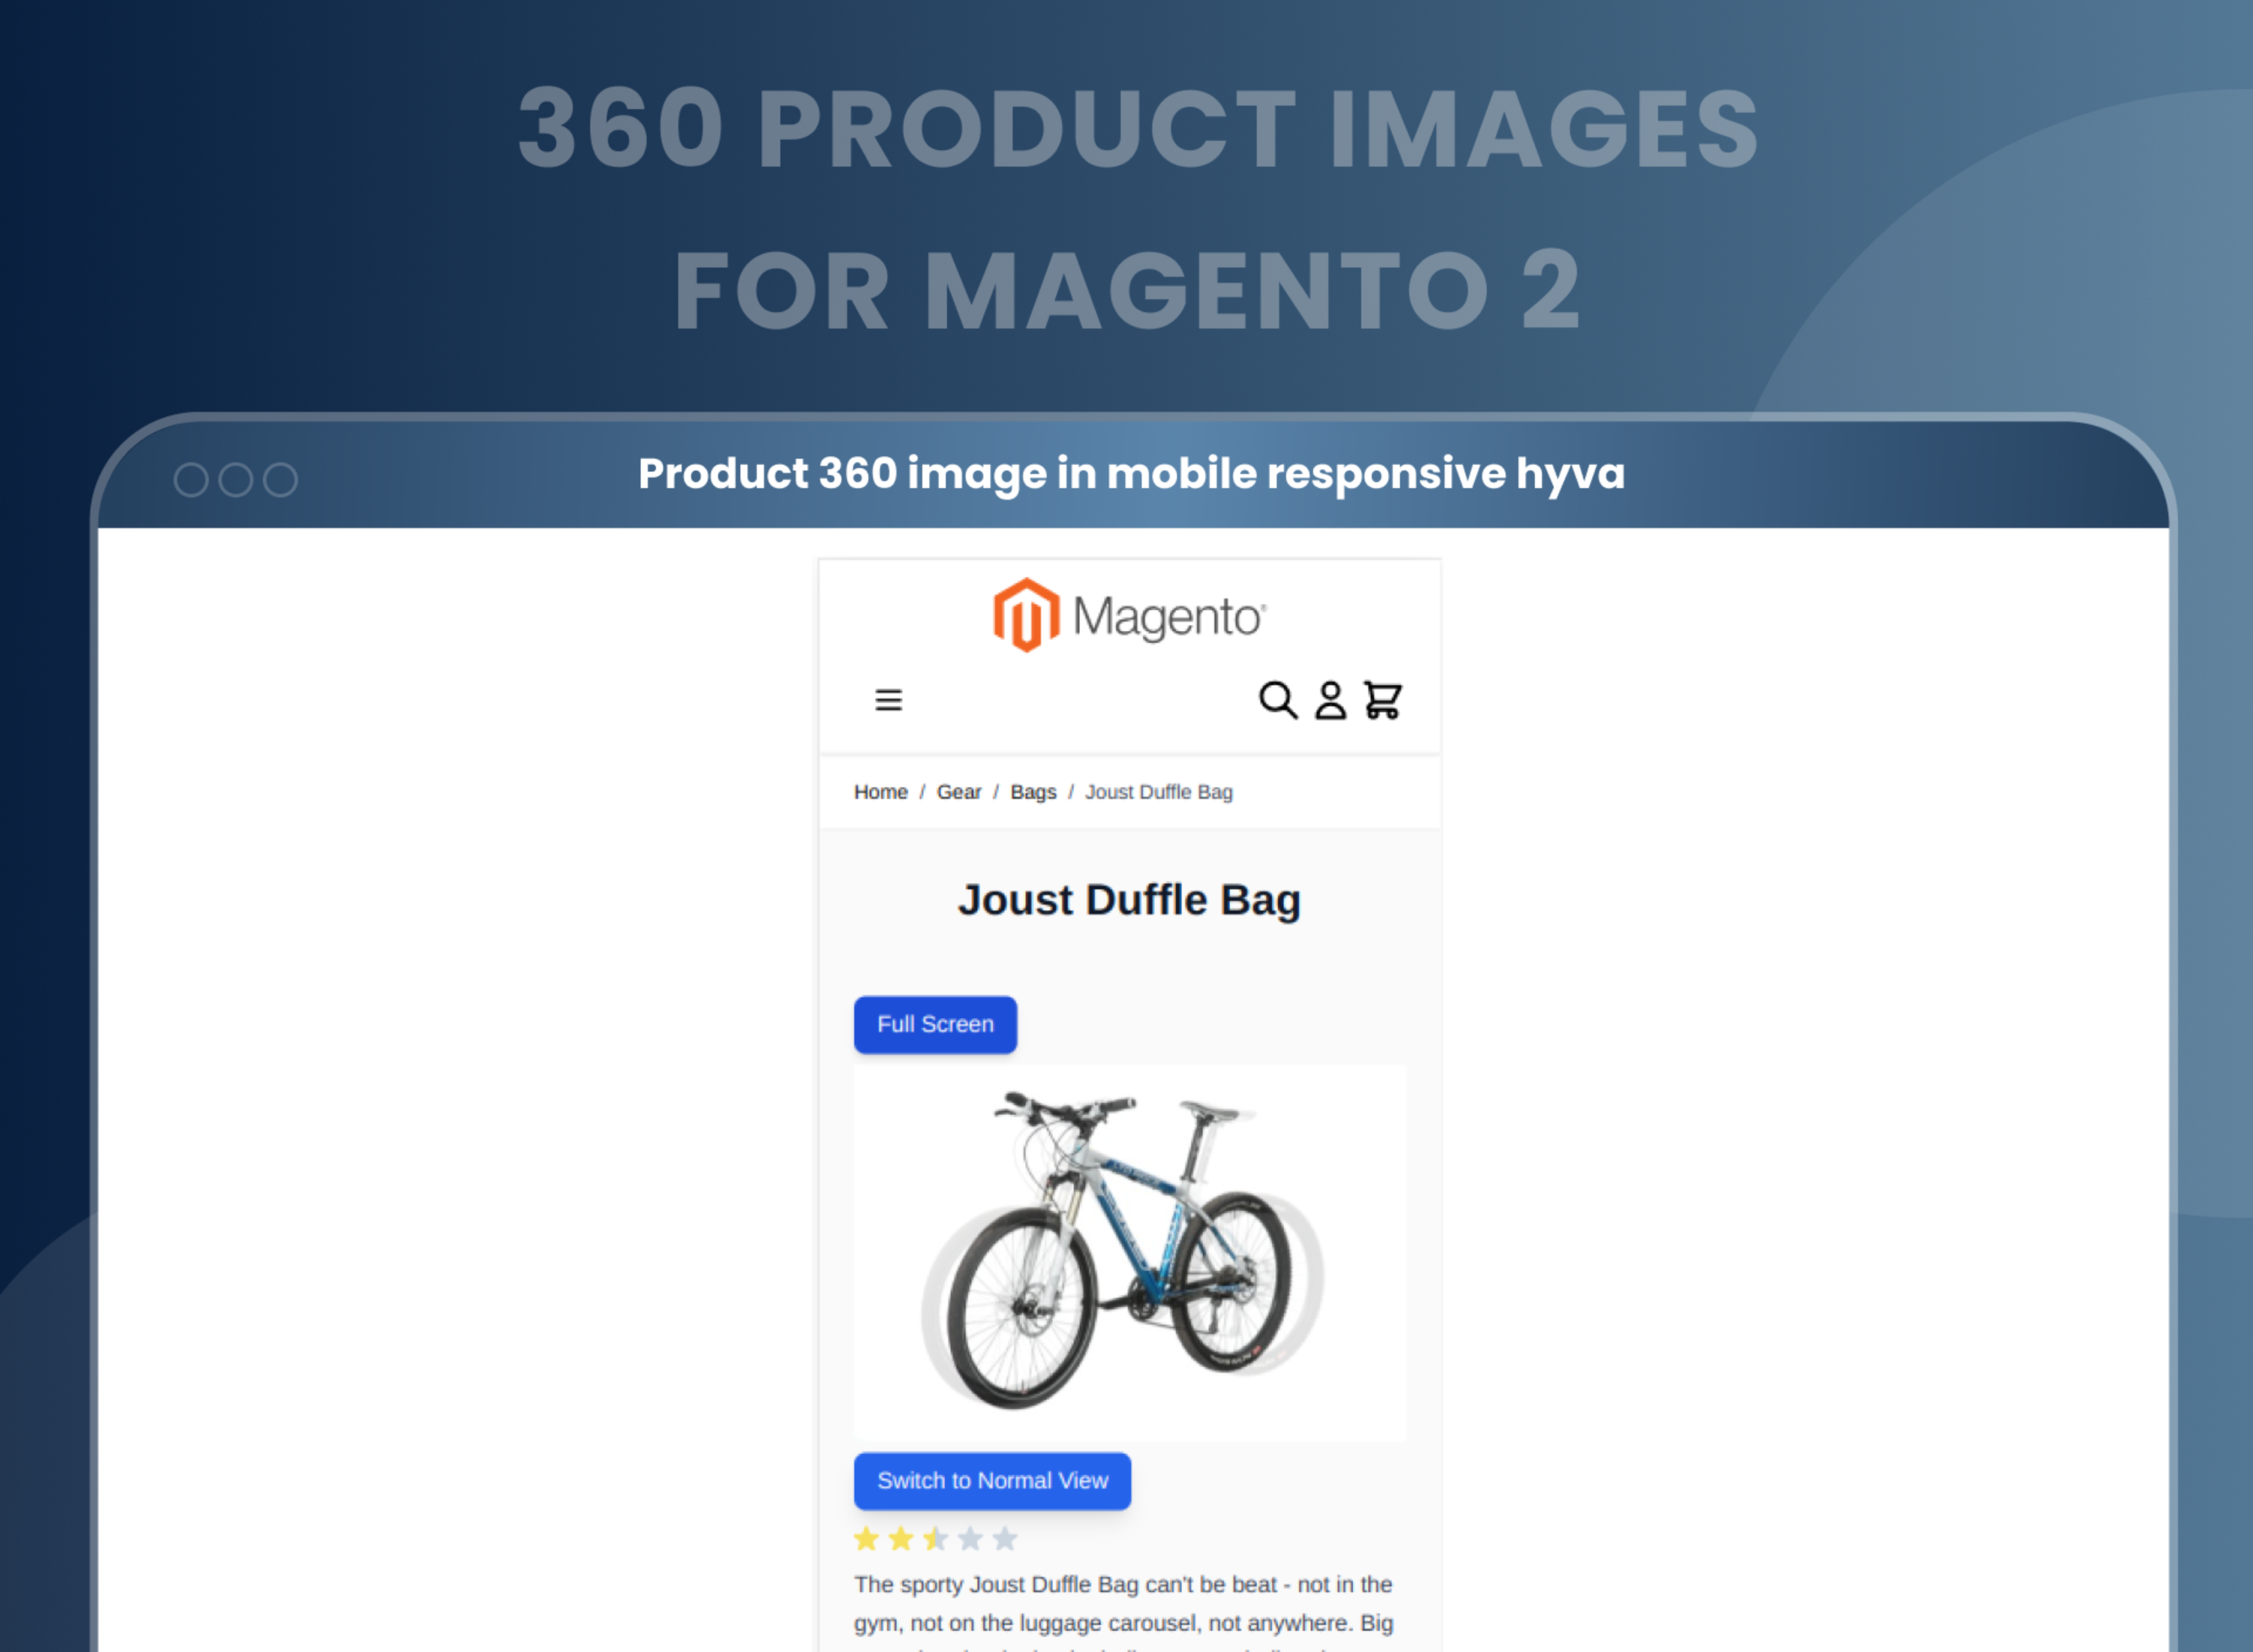 Product 360 image in mobile responsive hyva